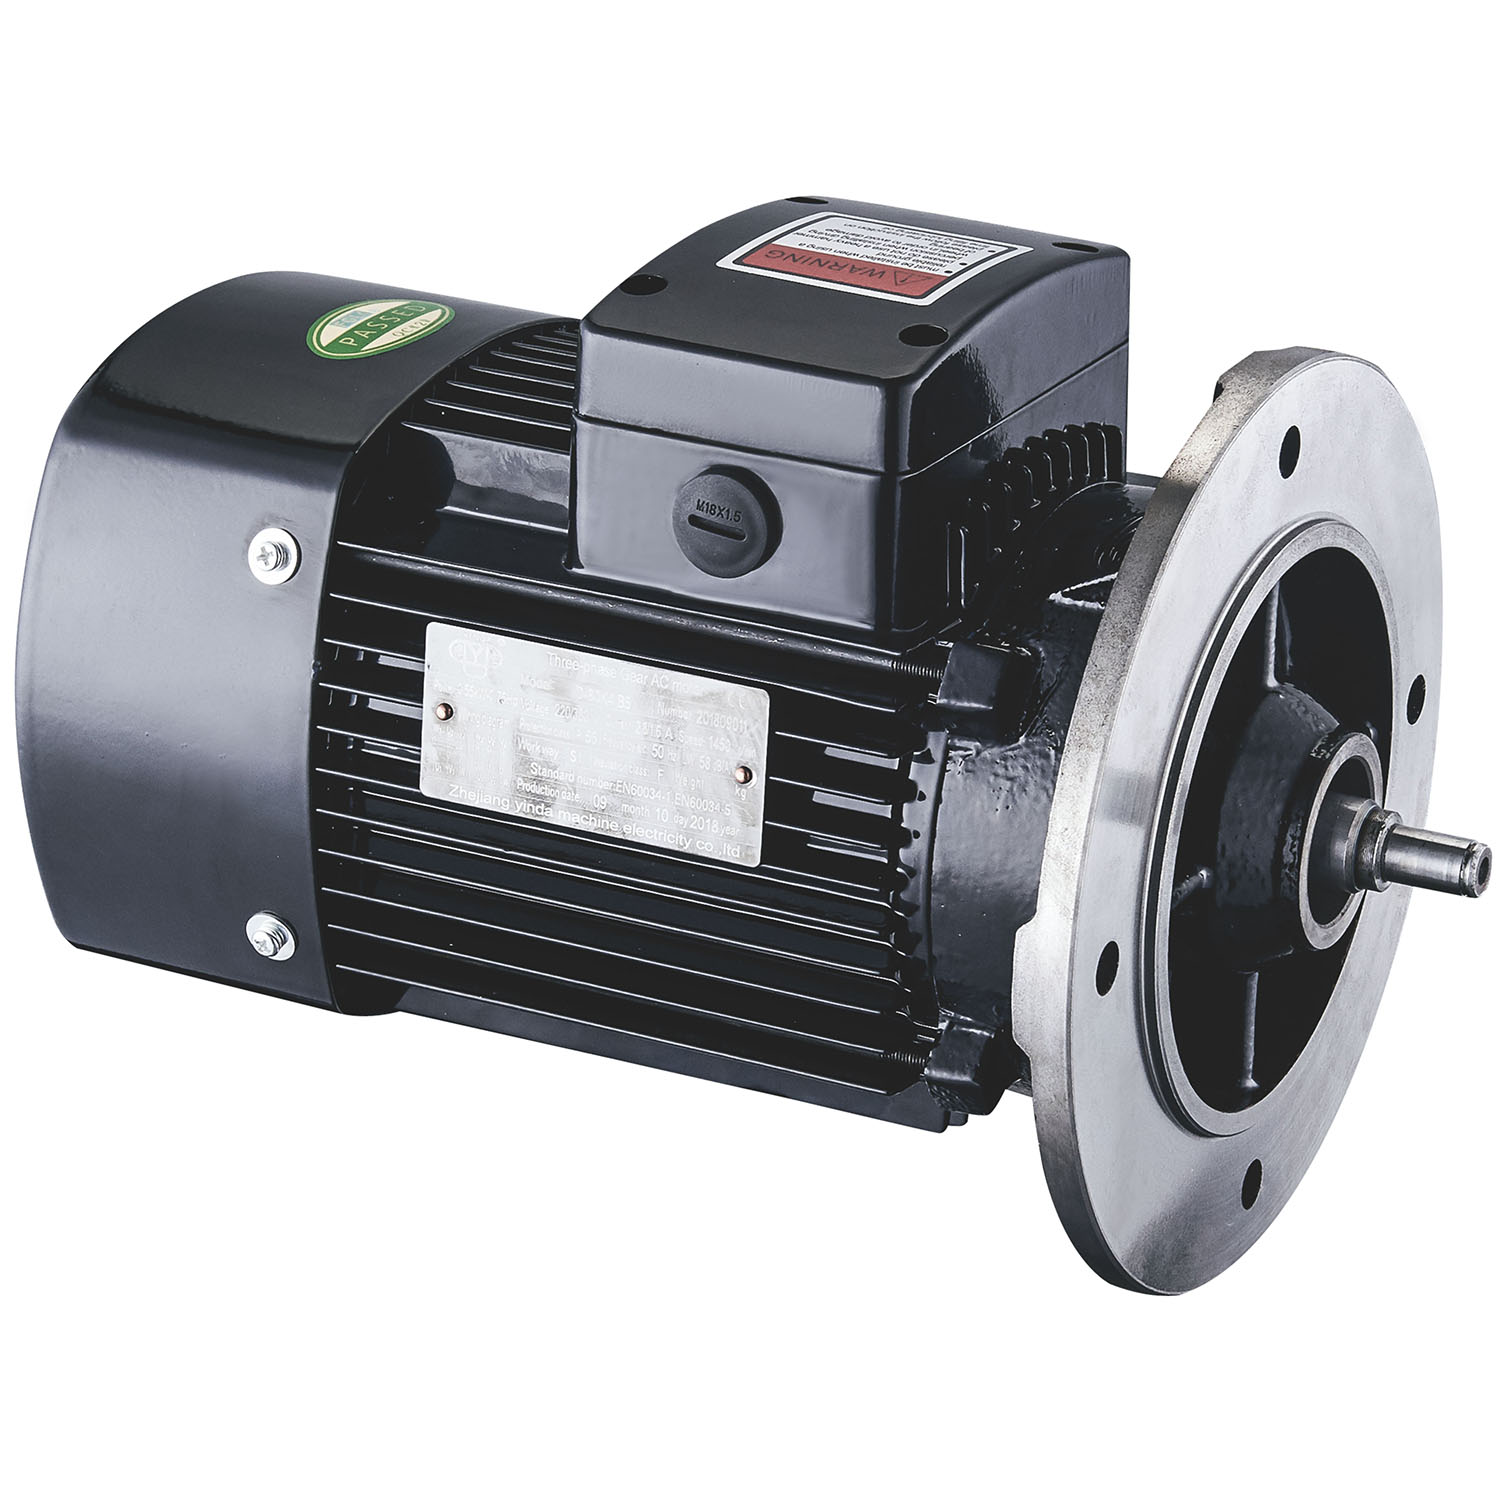 3KW-6P hard tooth surface reducer Four series of high efficiency motors